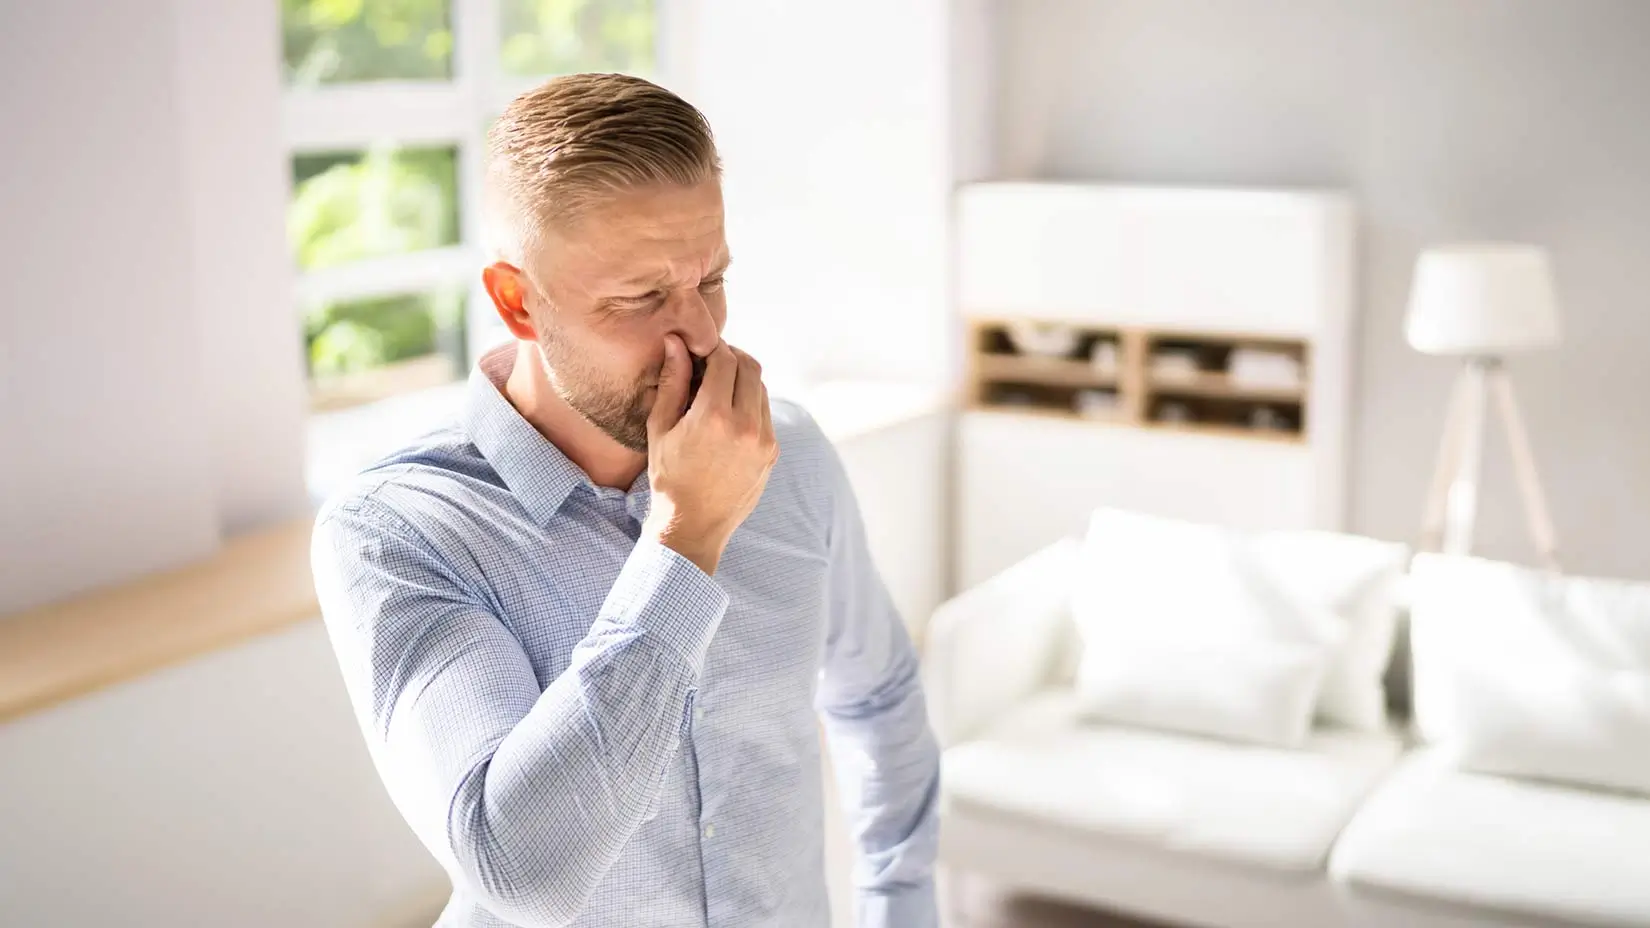 A man stands in his living room plugging his nose and making a disgusted face, presumably because of a sewer gas smell.